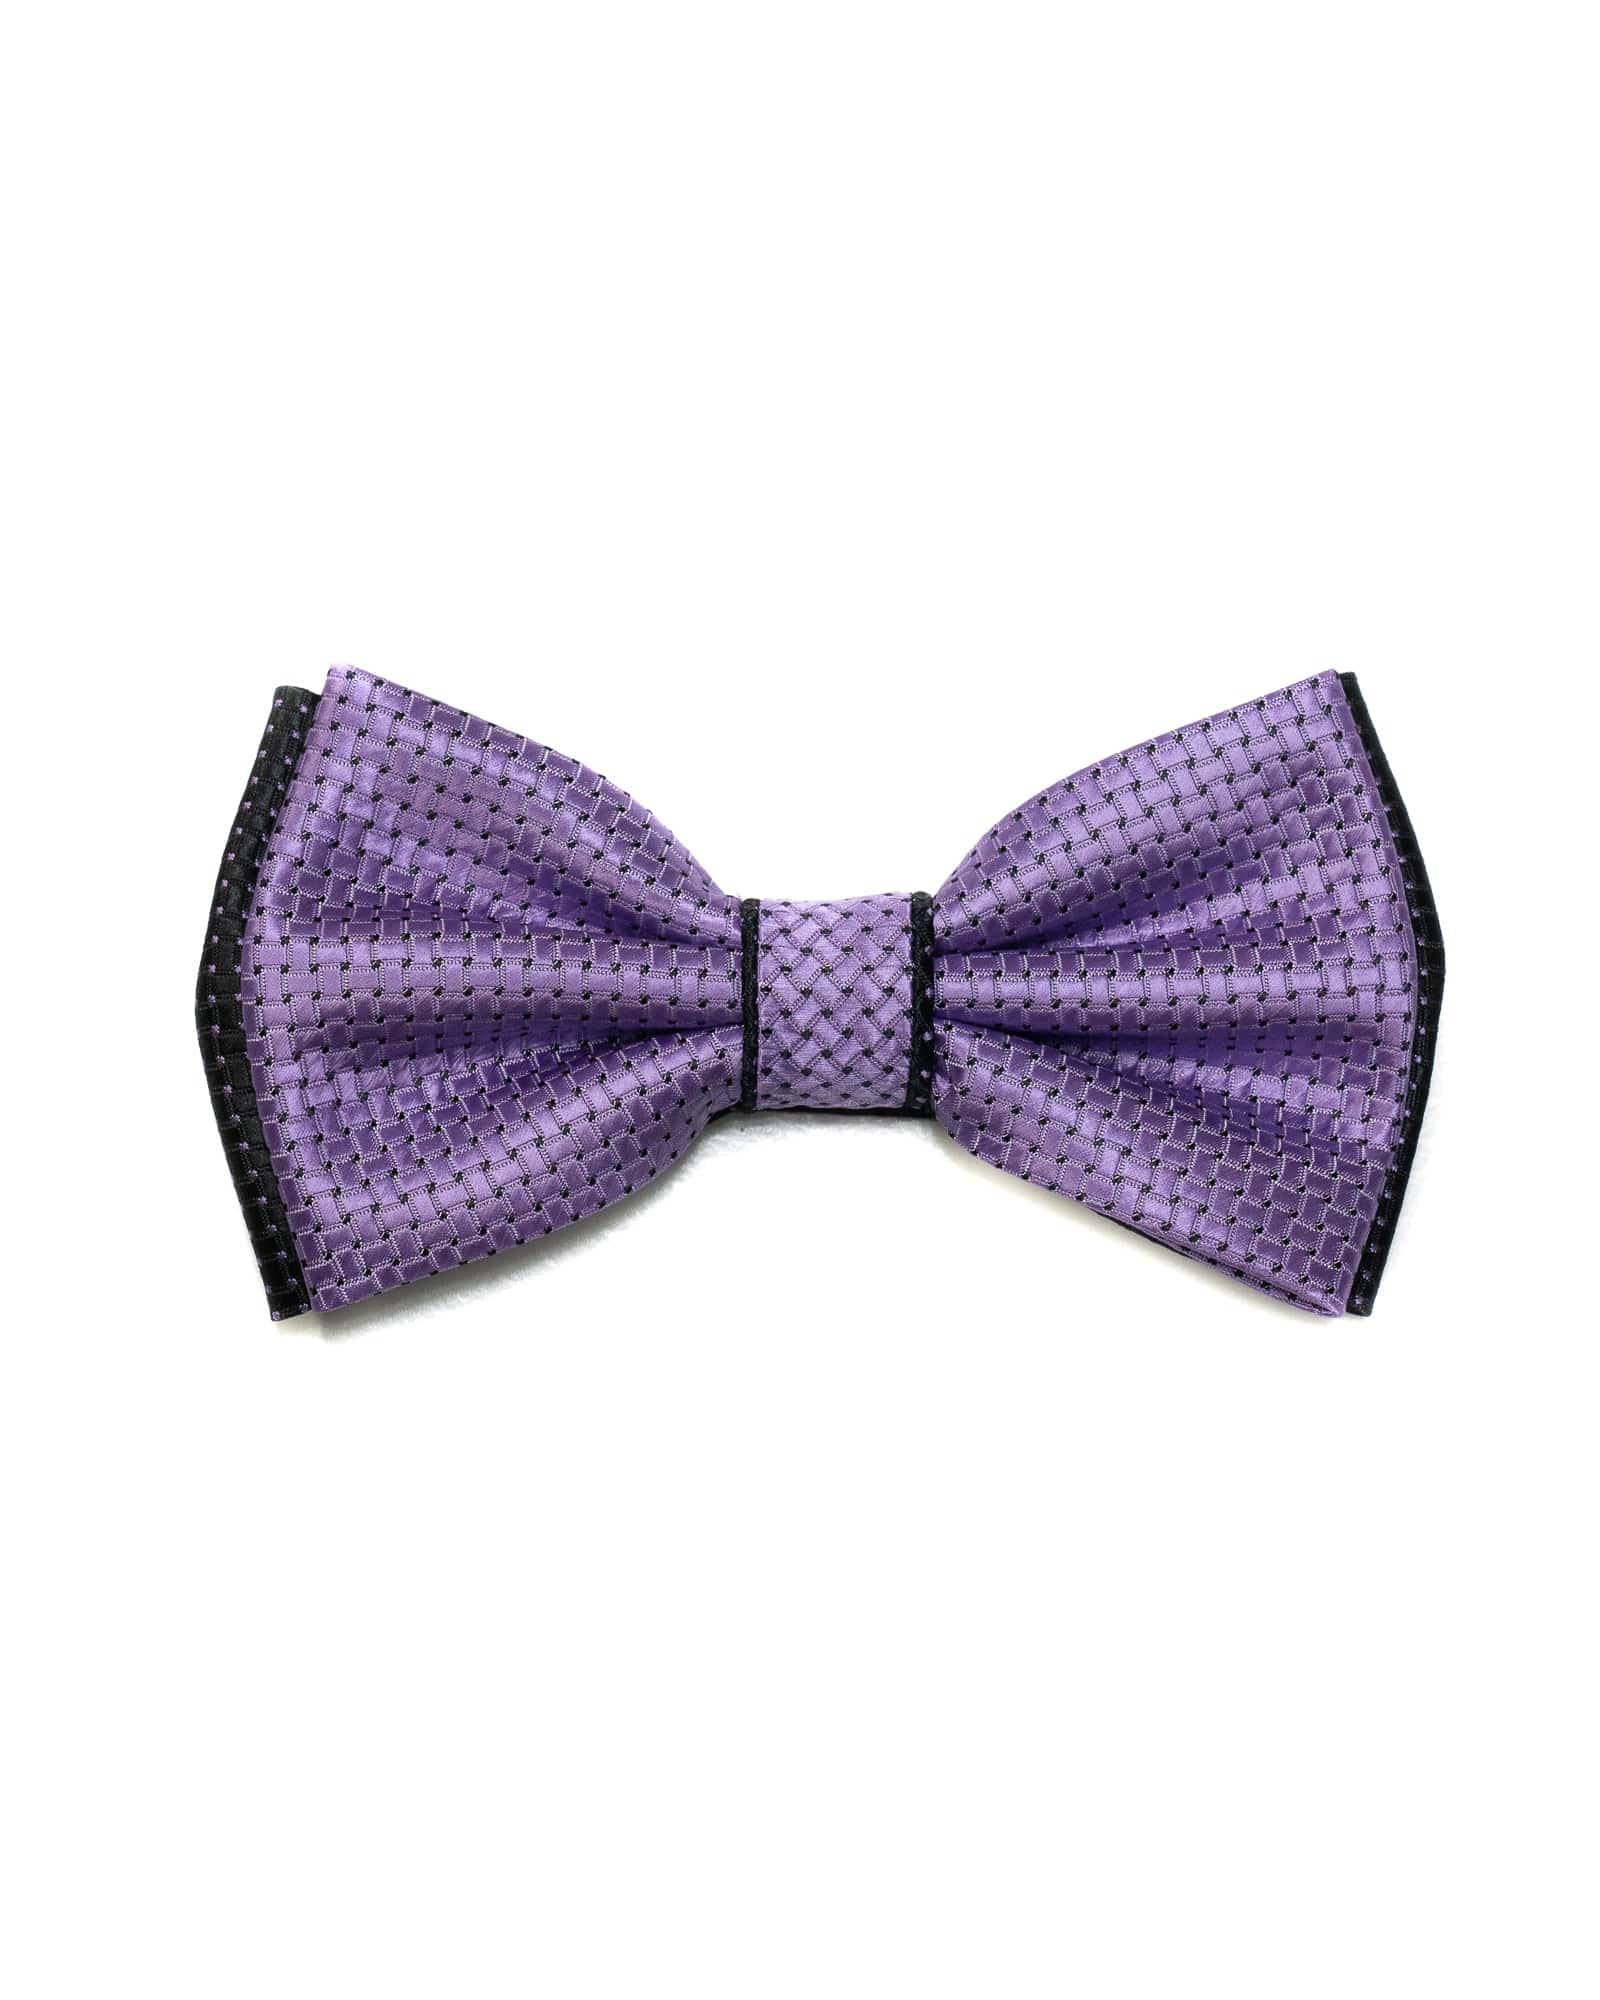 Bow Tie In Two Tone With Two Pocket Squares In Purple & Black Neat - Rainwater's Men's Clothing and Tuxedo Rental